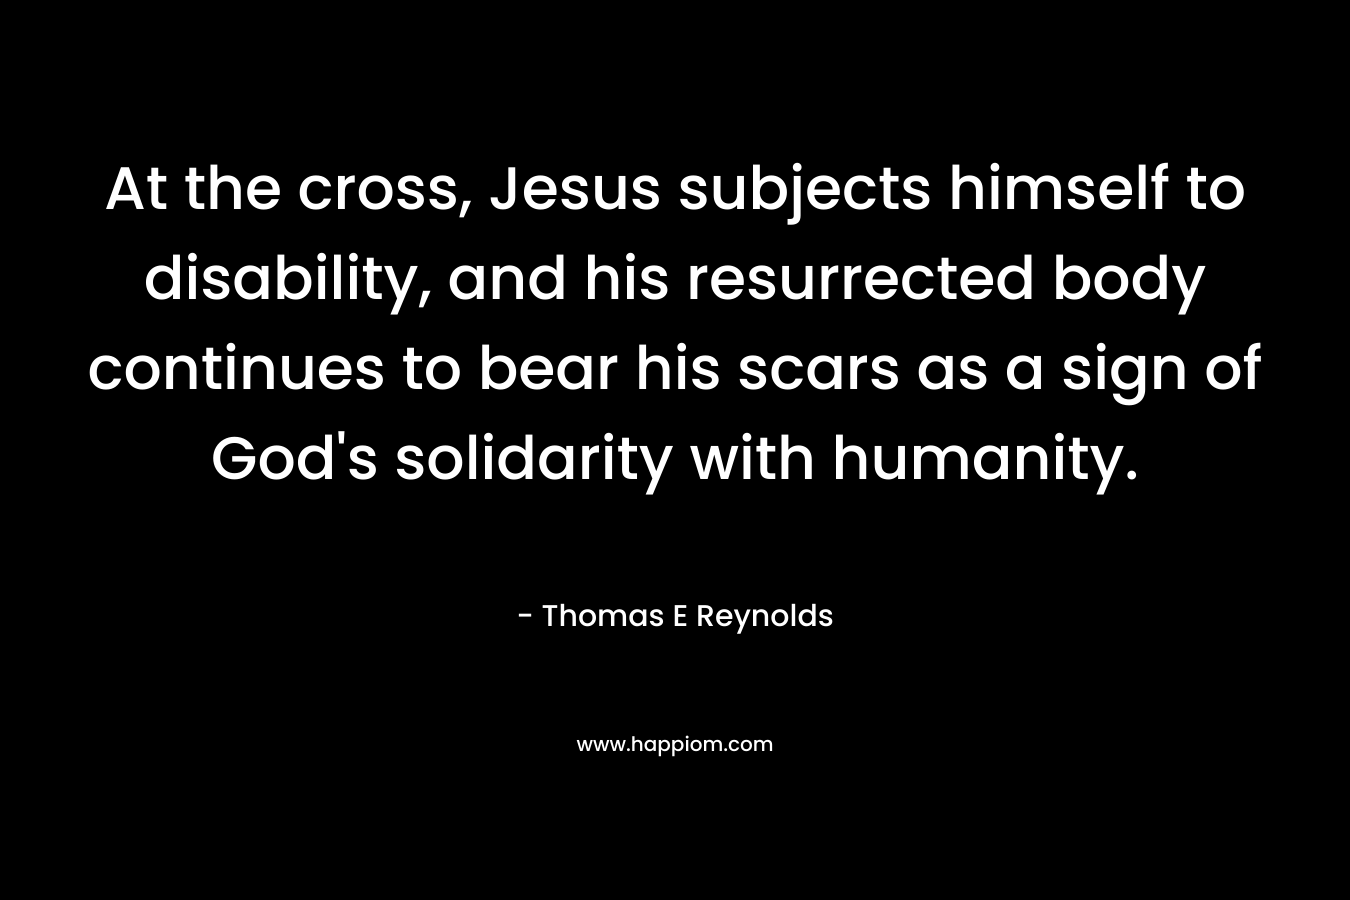 At the cross, Jesus subjects himself to disability, and his resurrected body continues to bear his scars as a sign of God’s solidarity with humanity. – Thomas E Reynolds